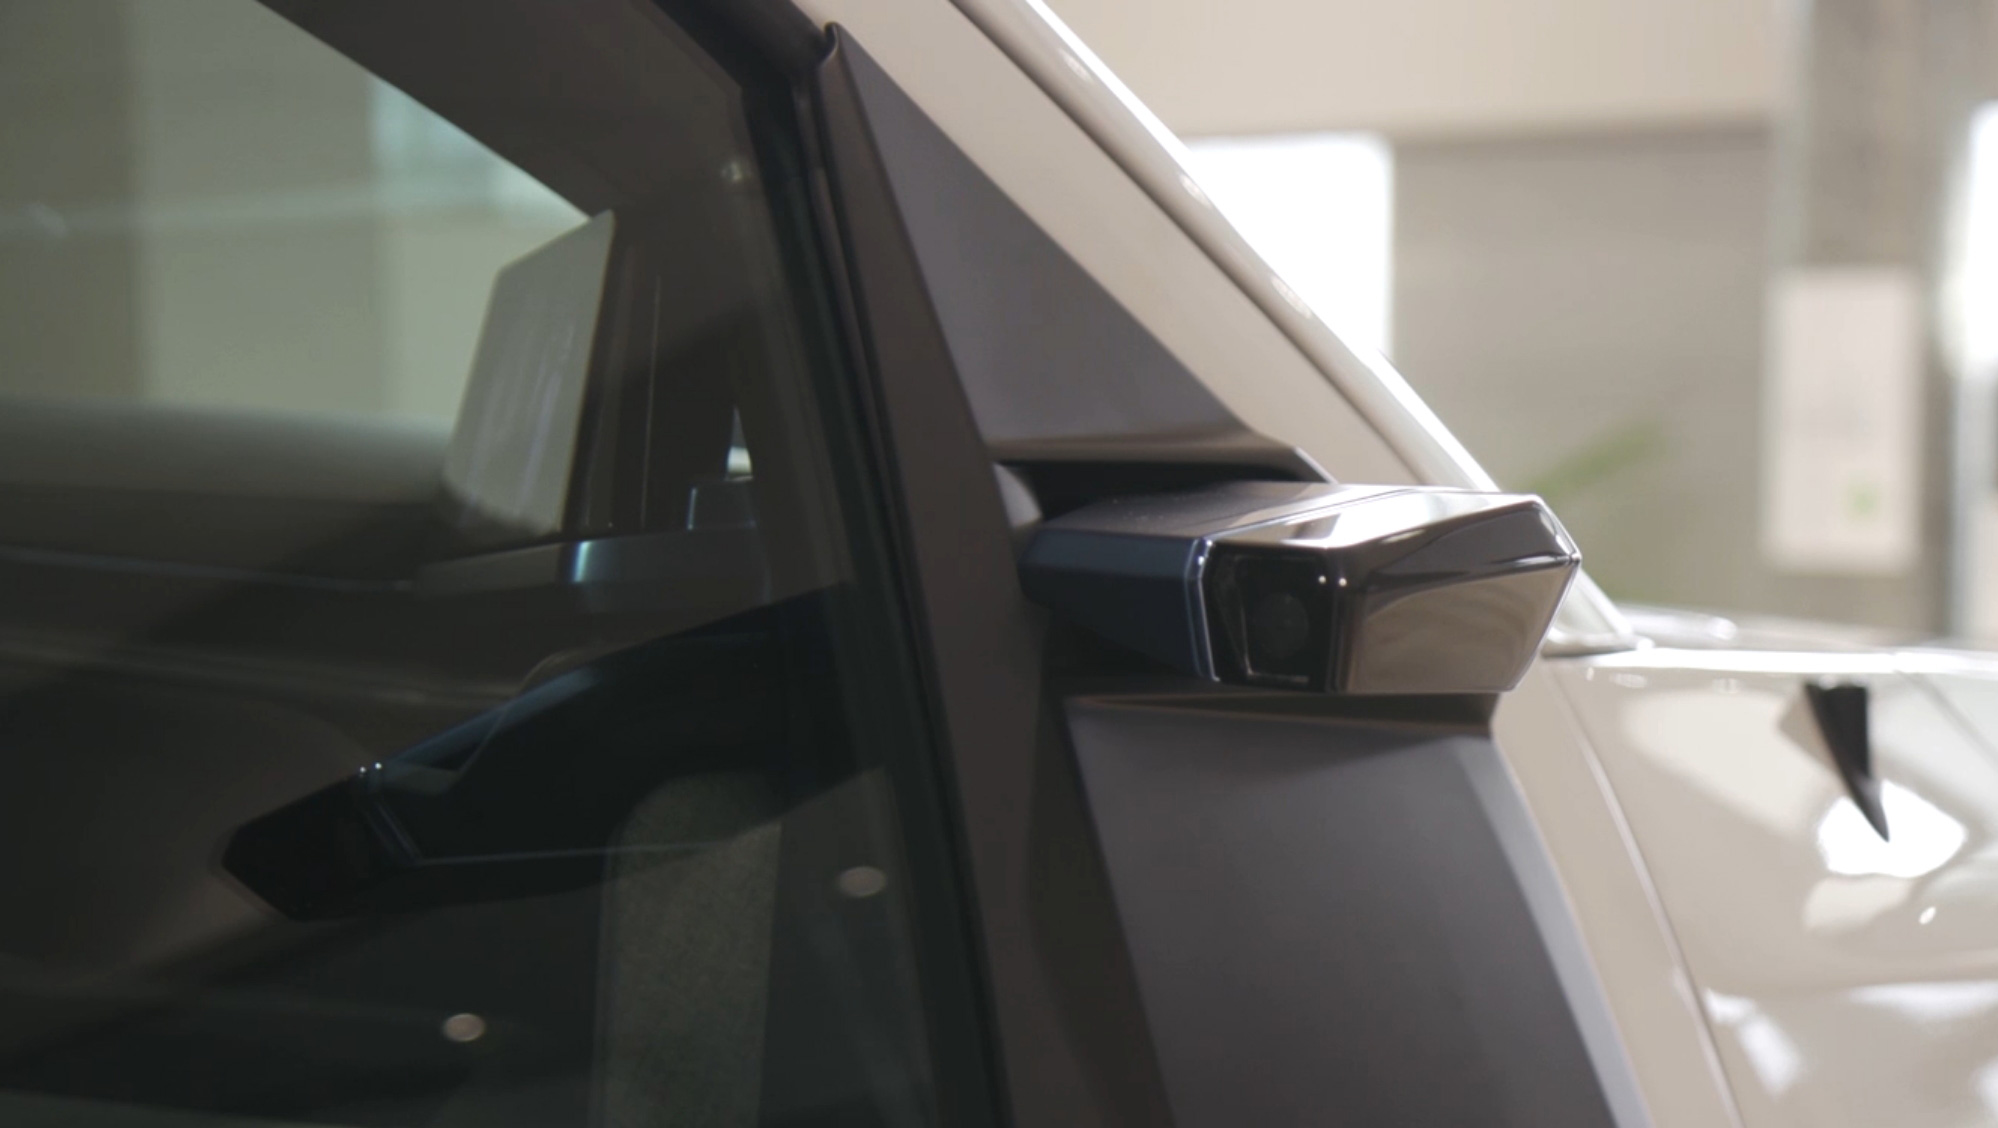 Safer, sustainable driving with E-mirrors